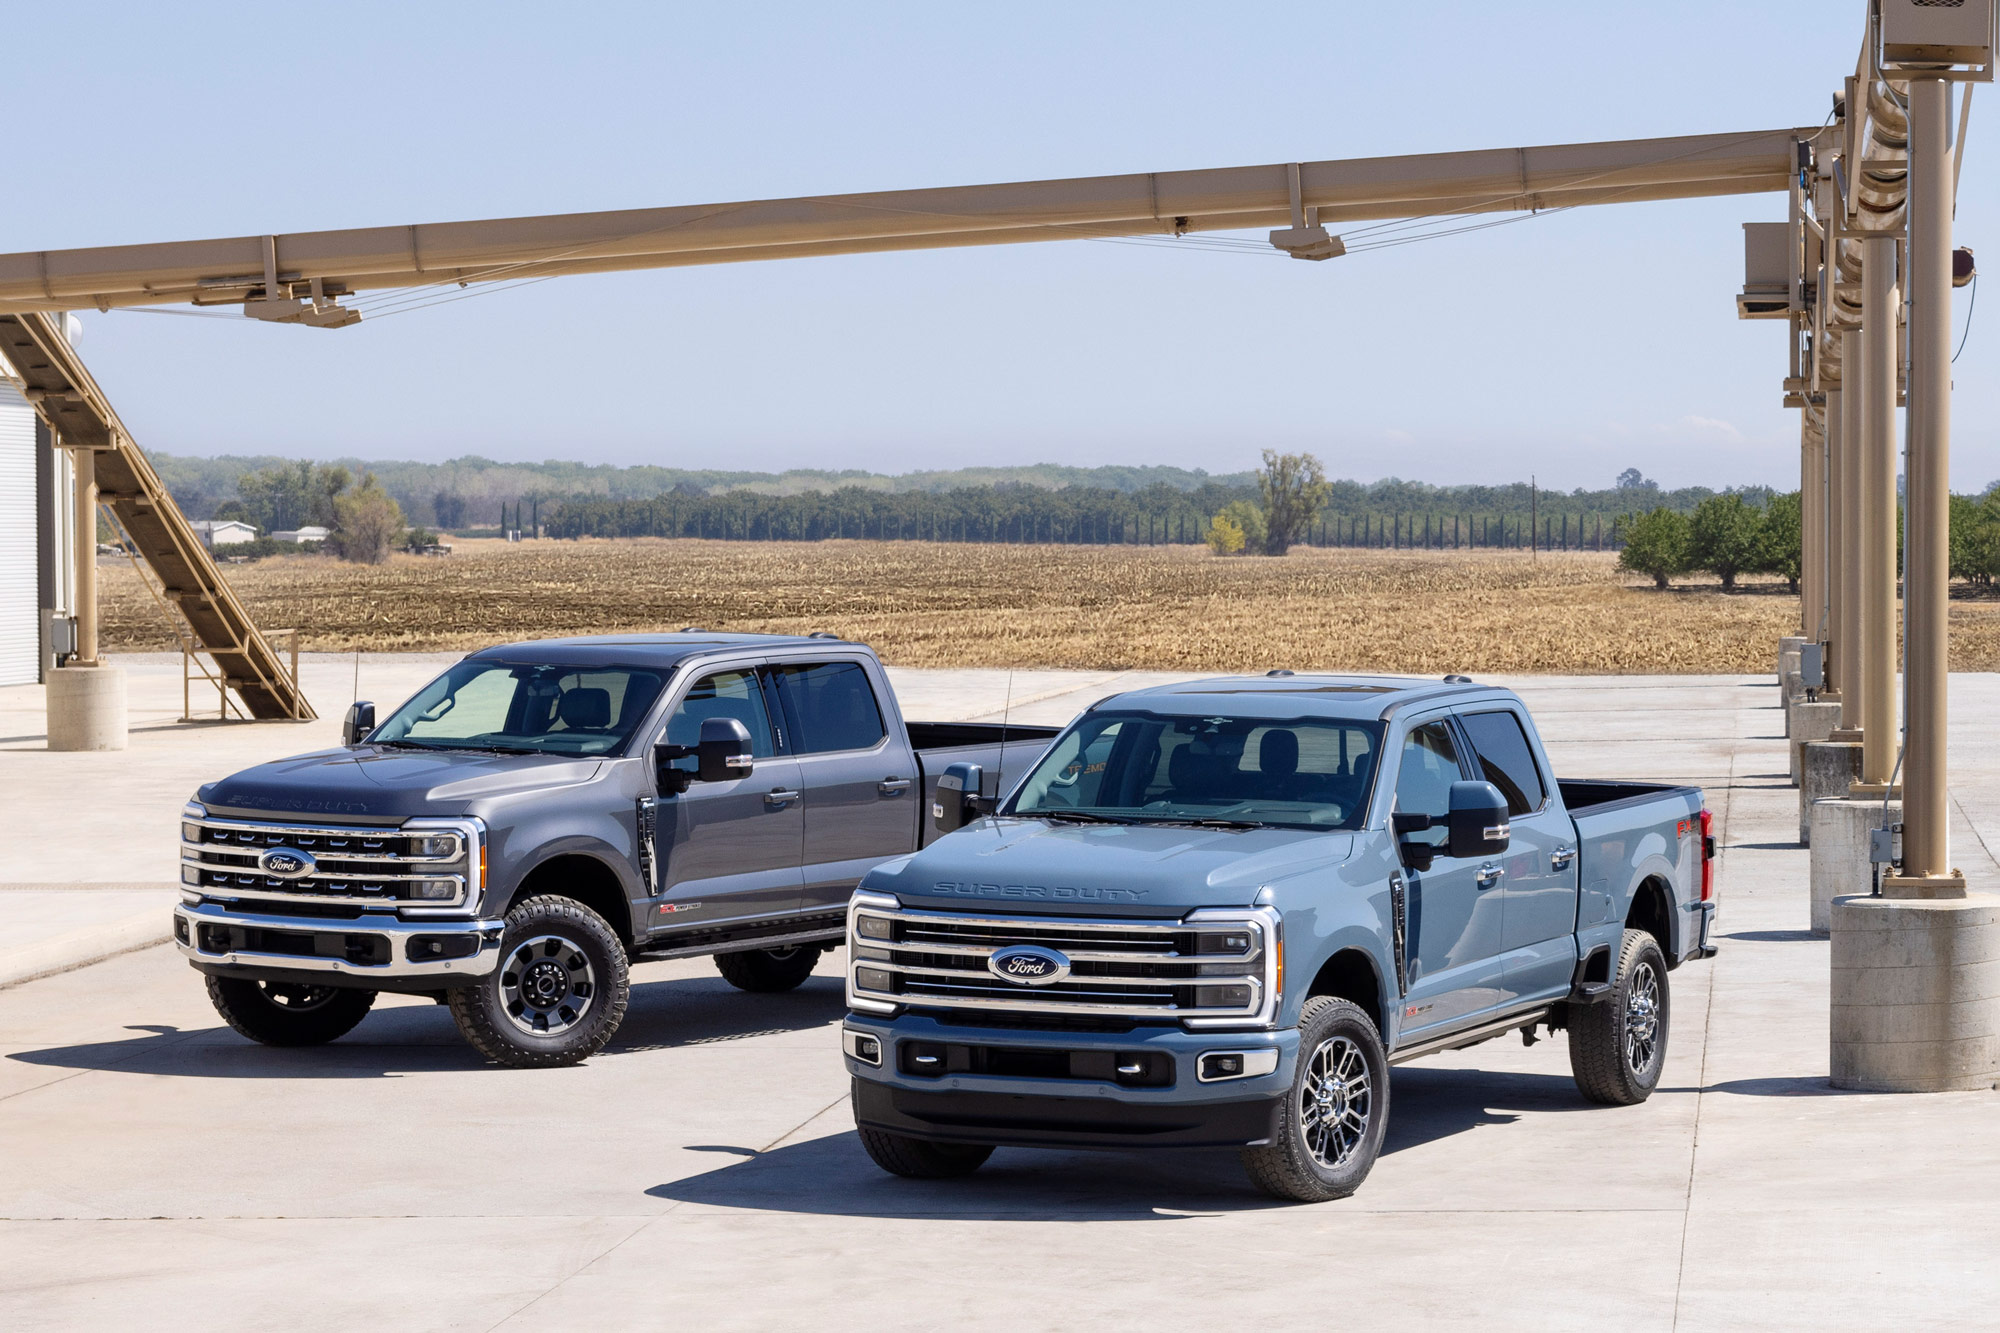 Two 2023 Ford F-Series Super Duty trucks sit parked on a concrete pad by an open field.